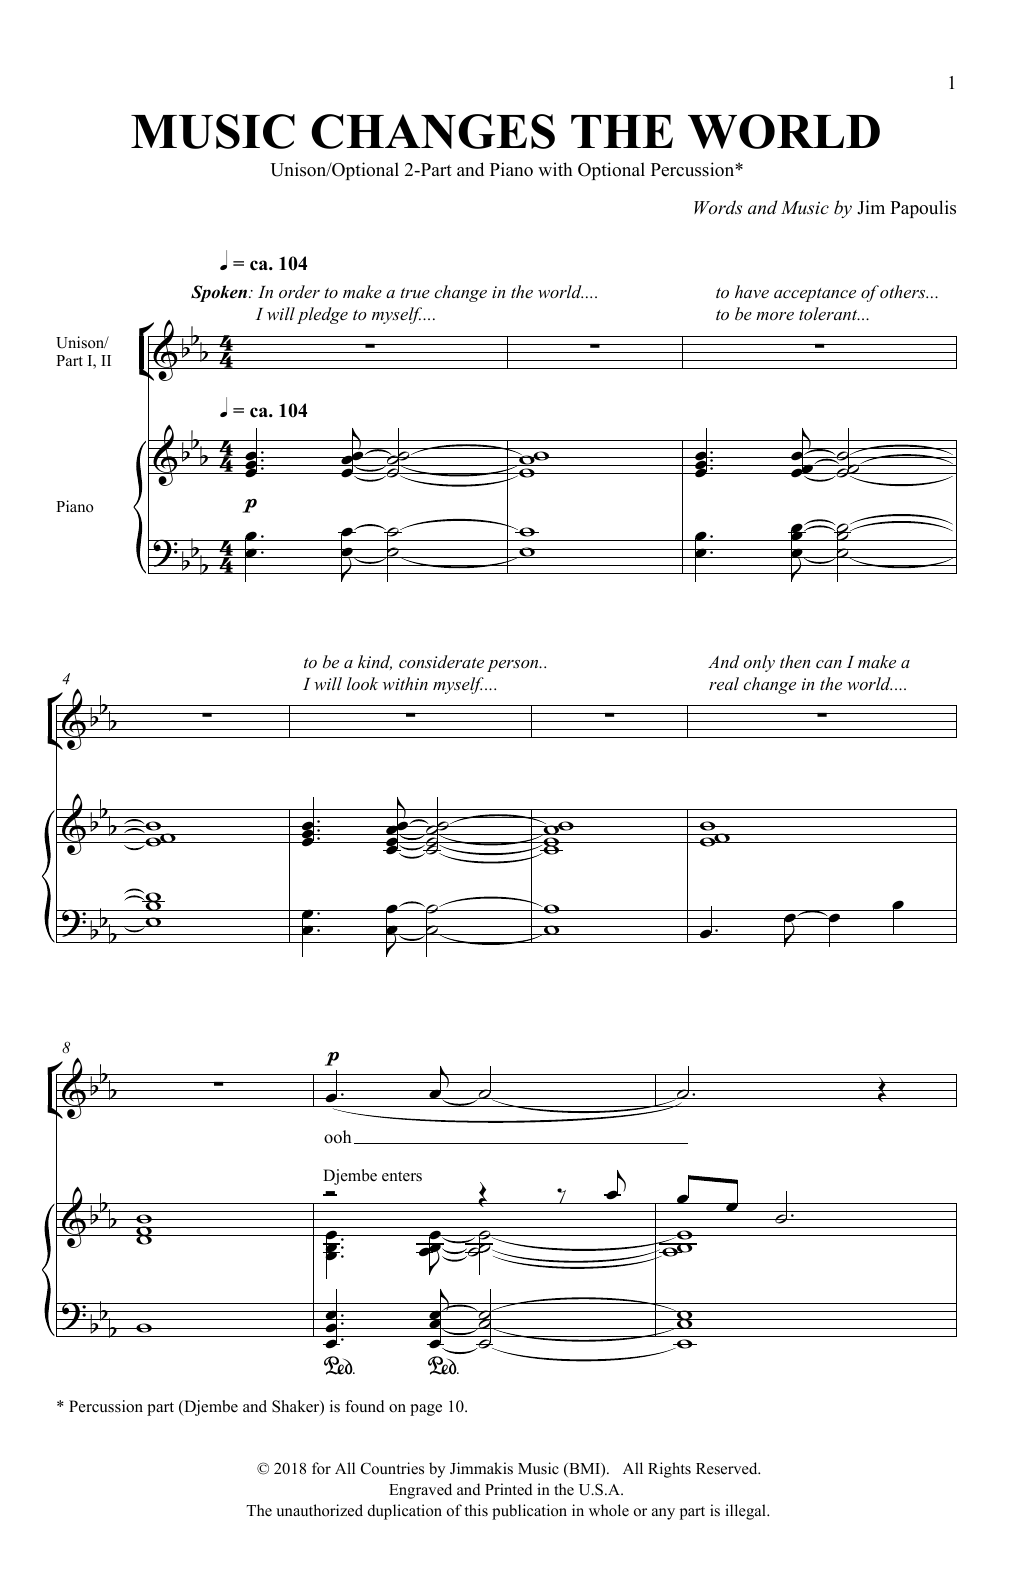 Download Jim Papoulis Music Changes The World Sheet Music